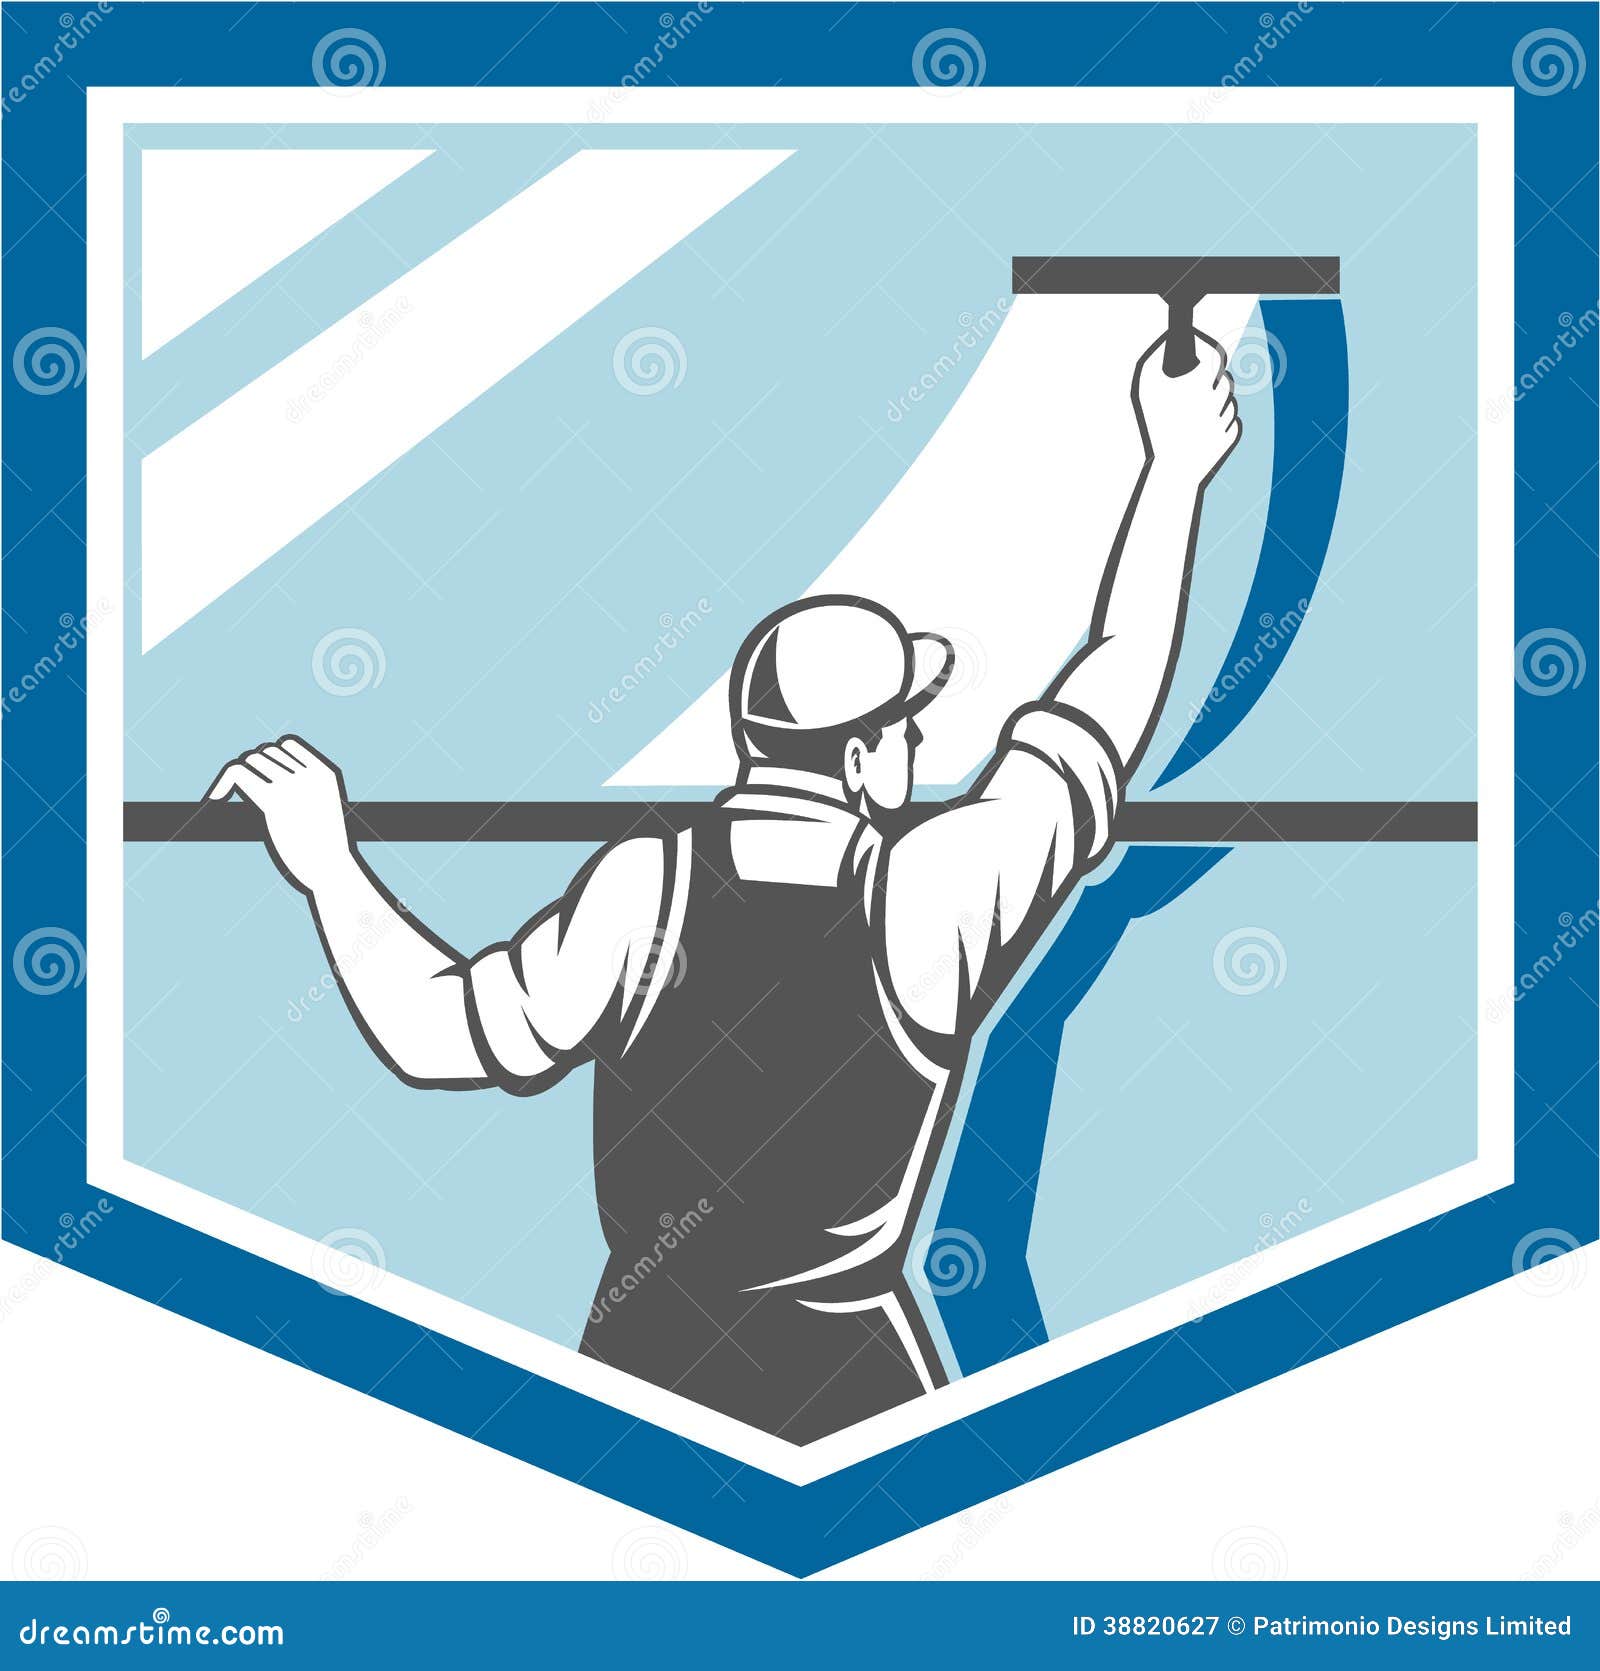 clip art for window cleaning - photo #35